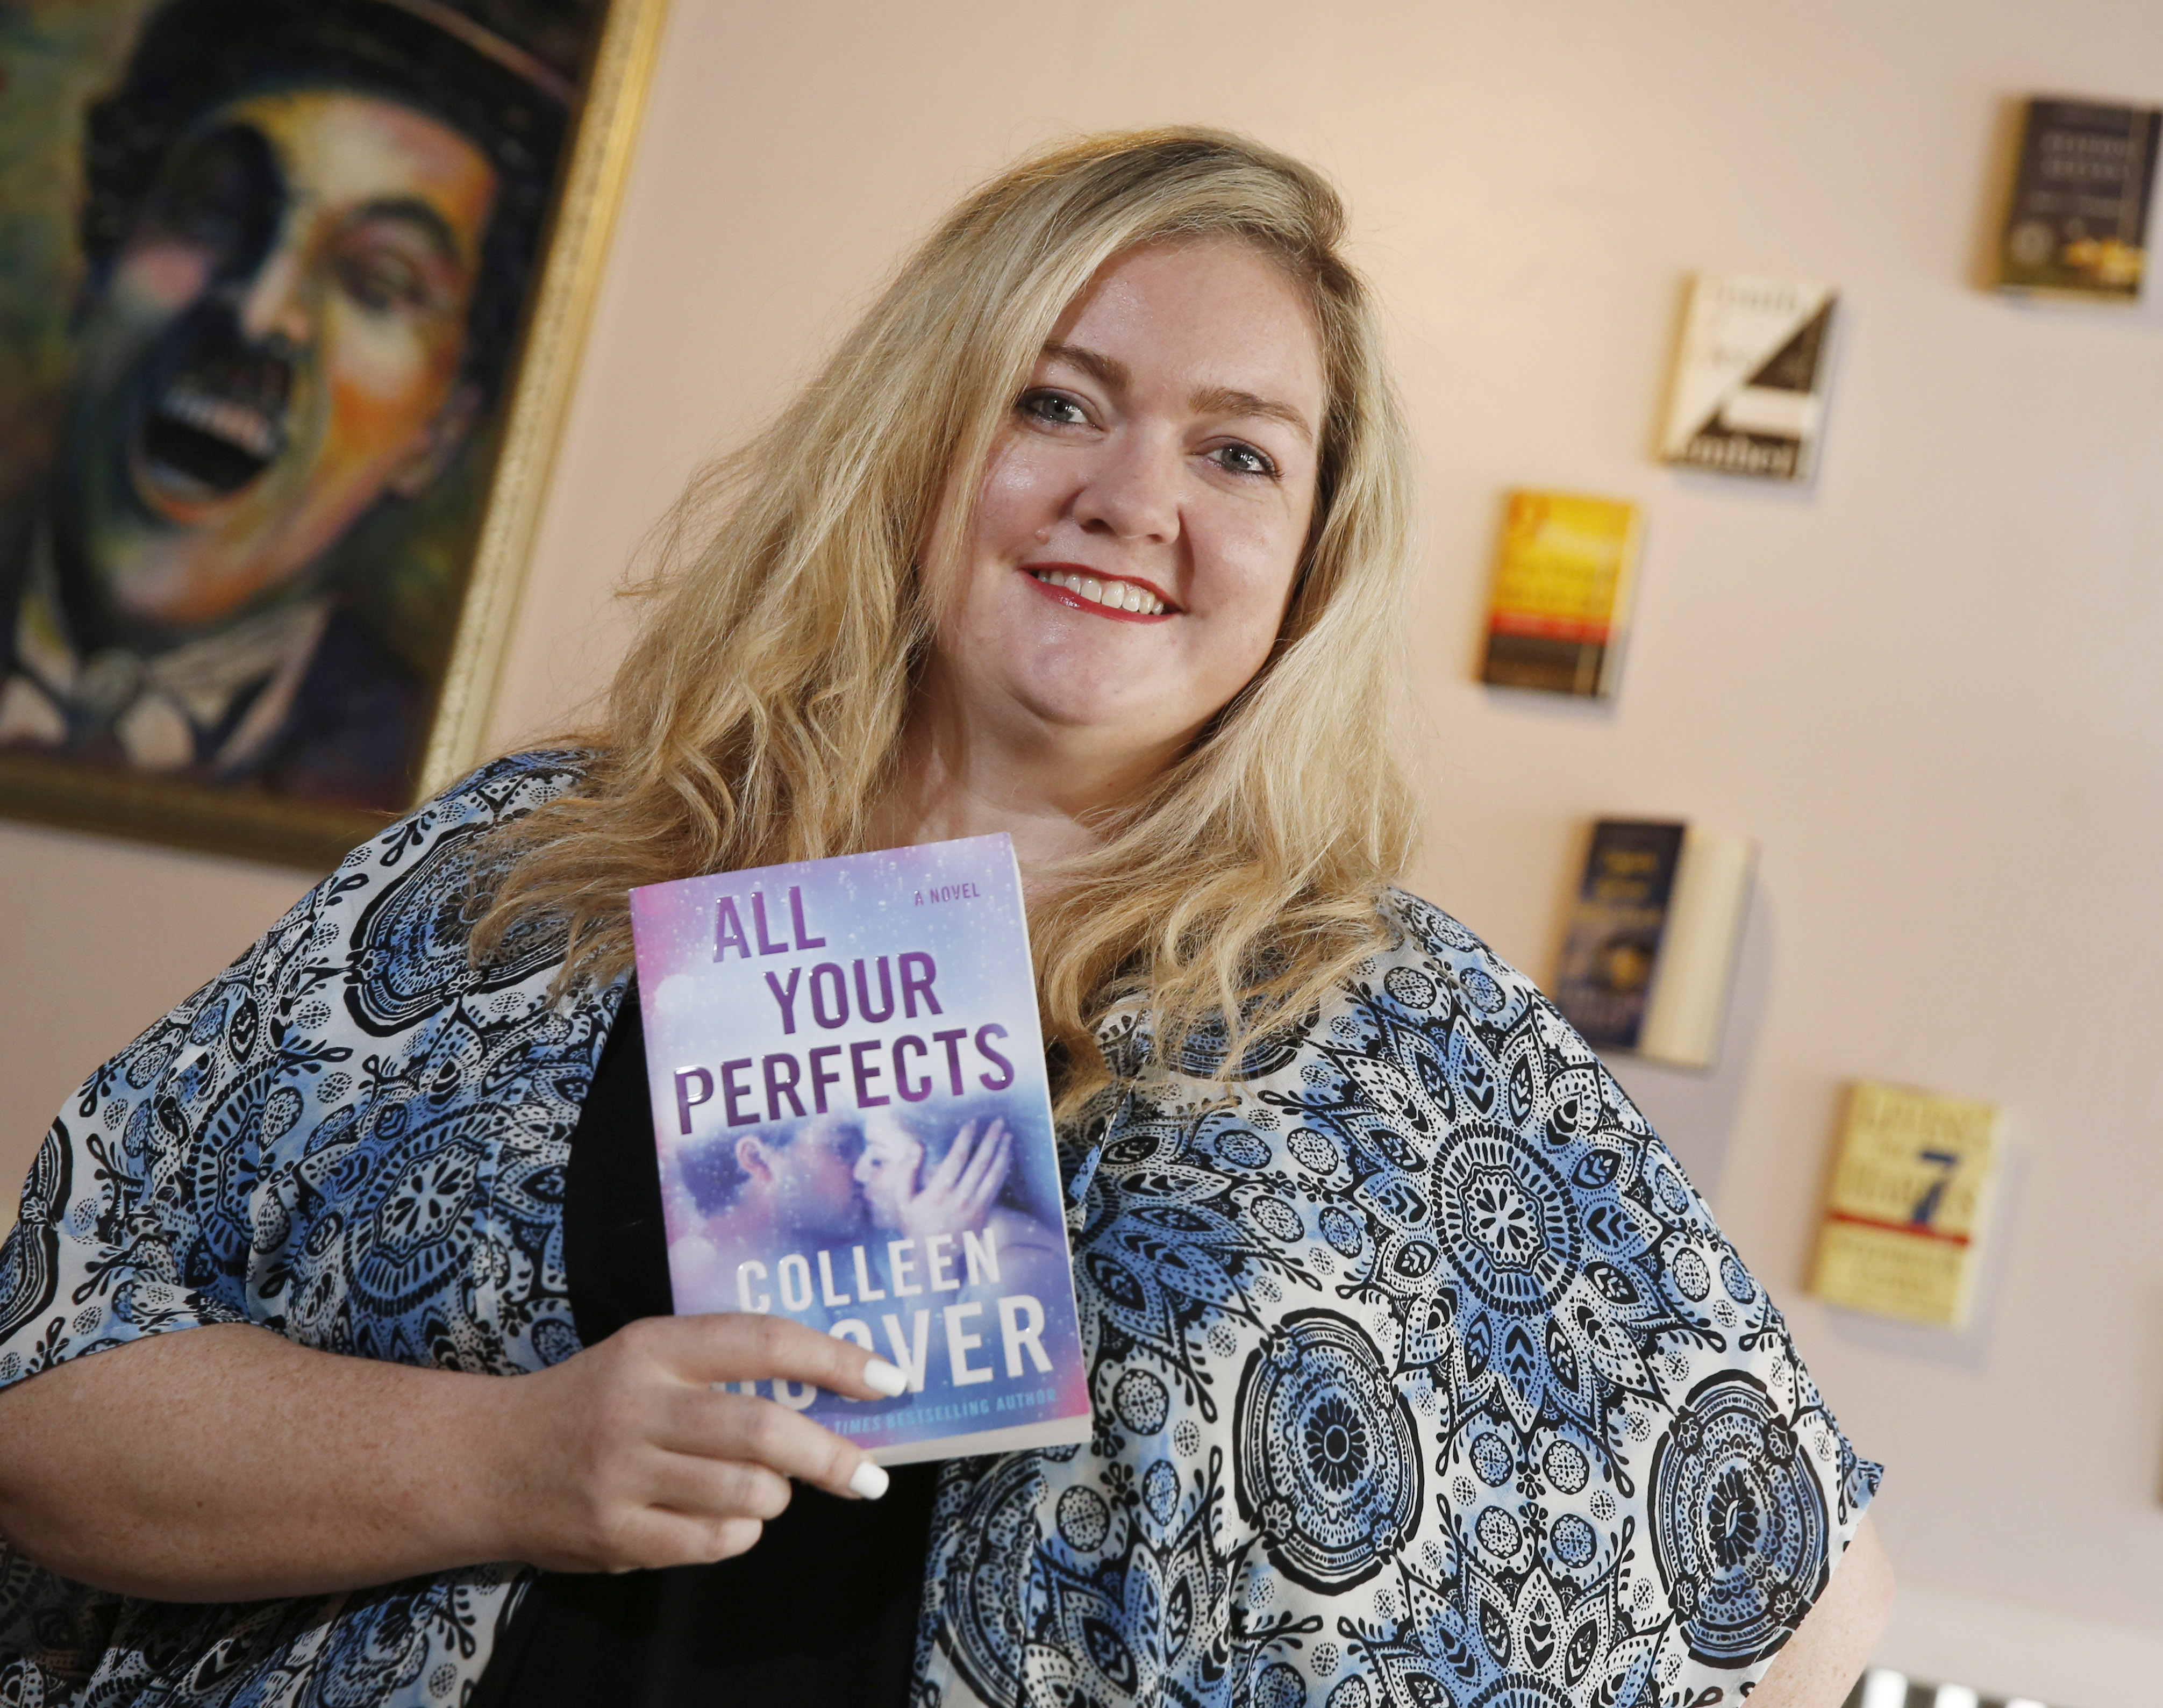 Colleen Hoover Net Worth - A Literary Sensation Redefining Contemporary Romance